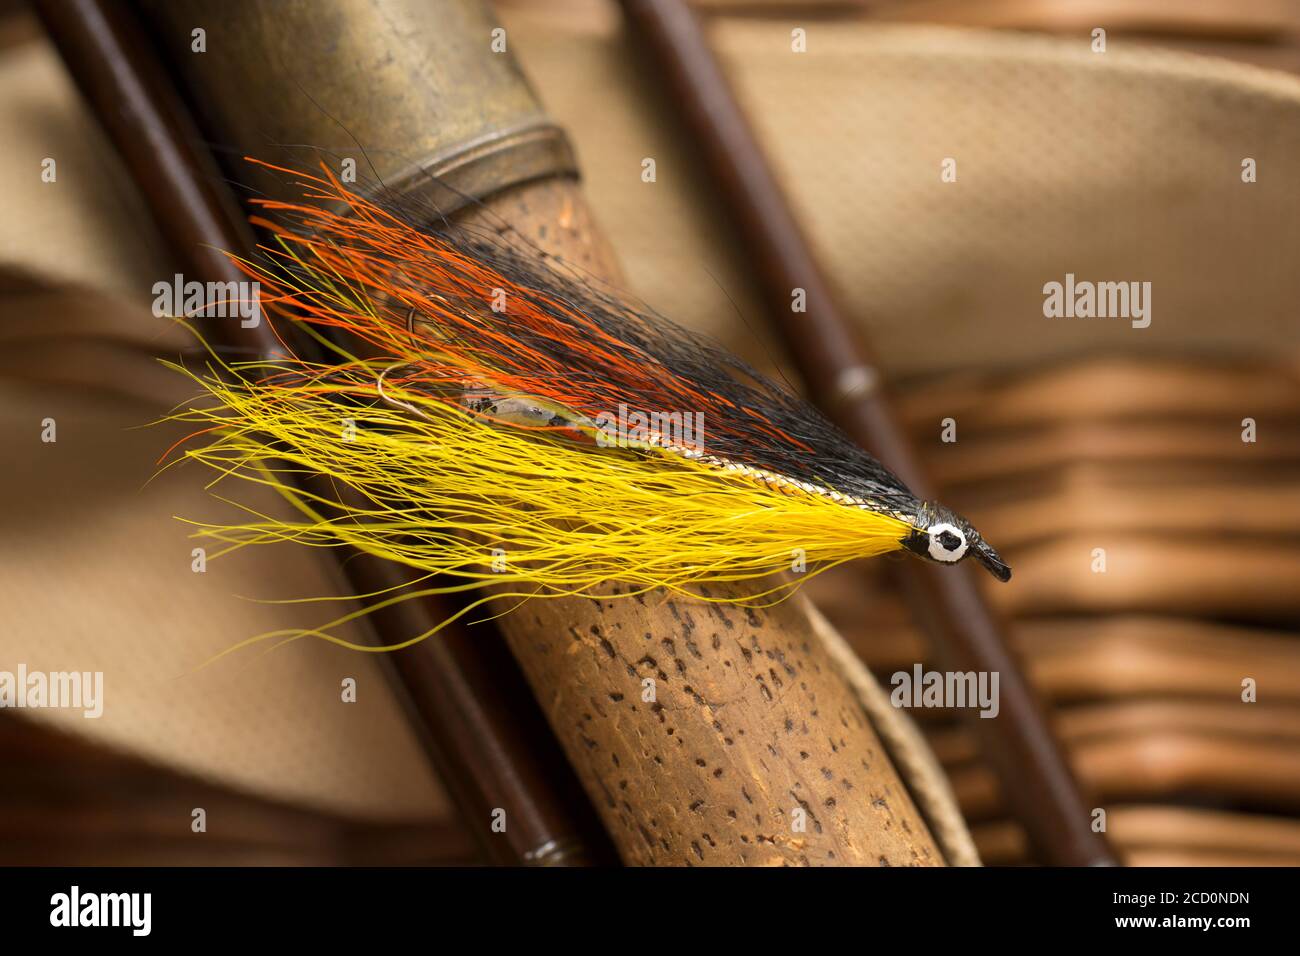 A single salmon fly that was probably homemade on the cork handle